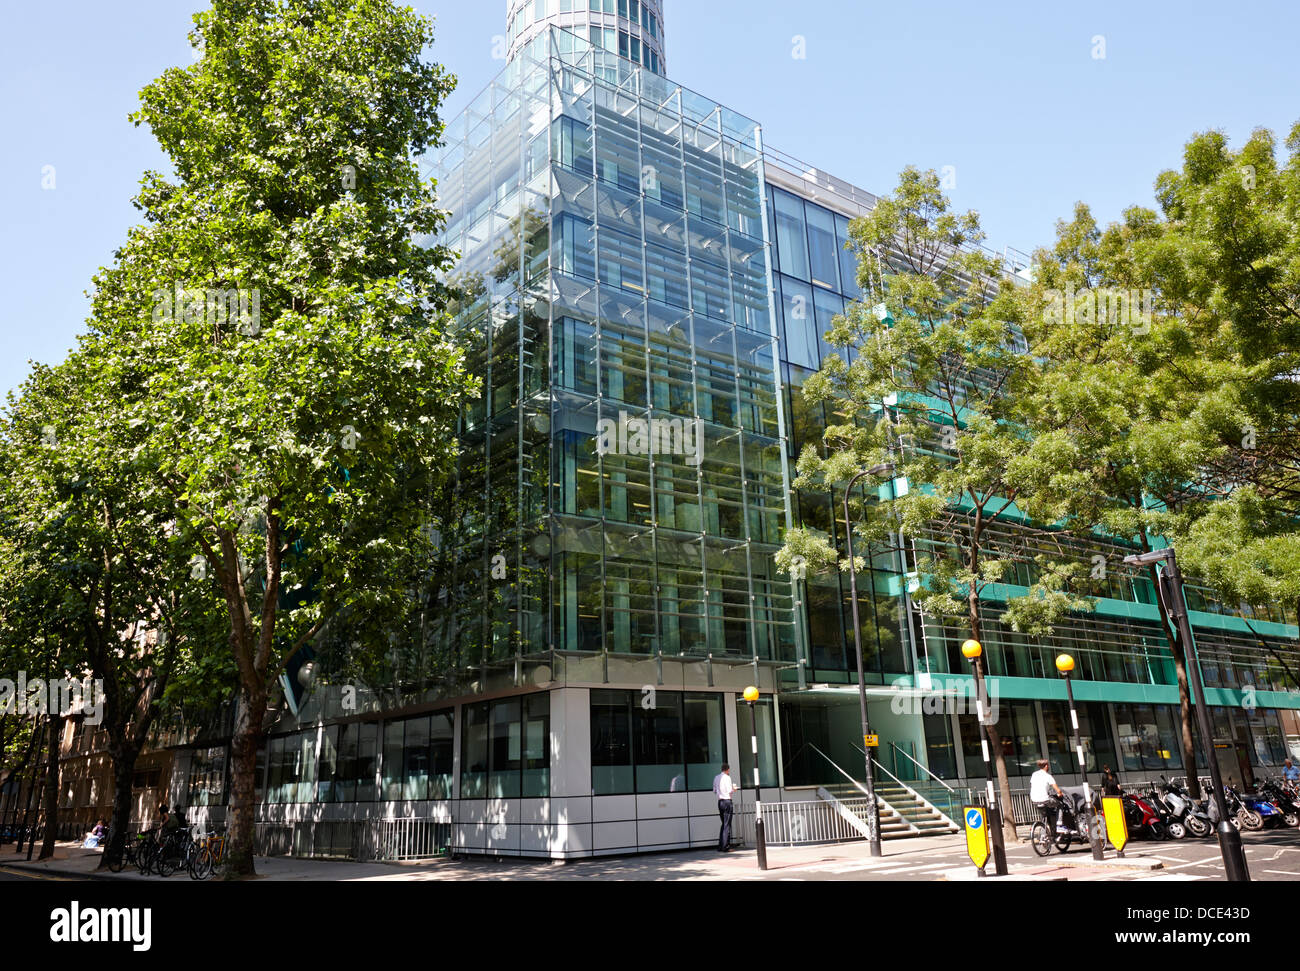 arup offices 13 fitzroy street acquired by Workspace group plc London England UK Stock Photo